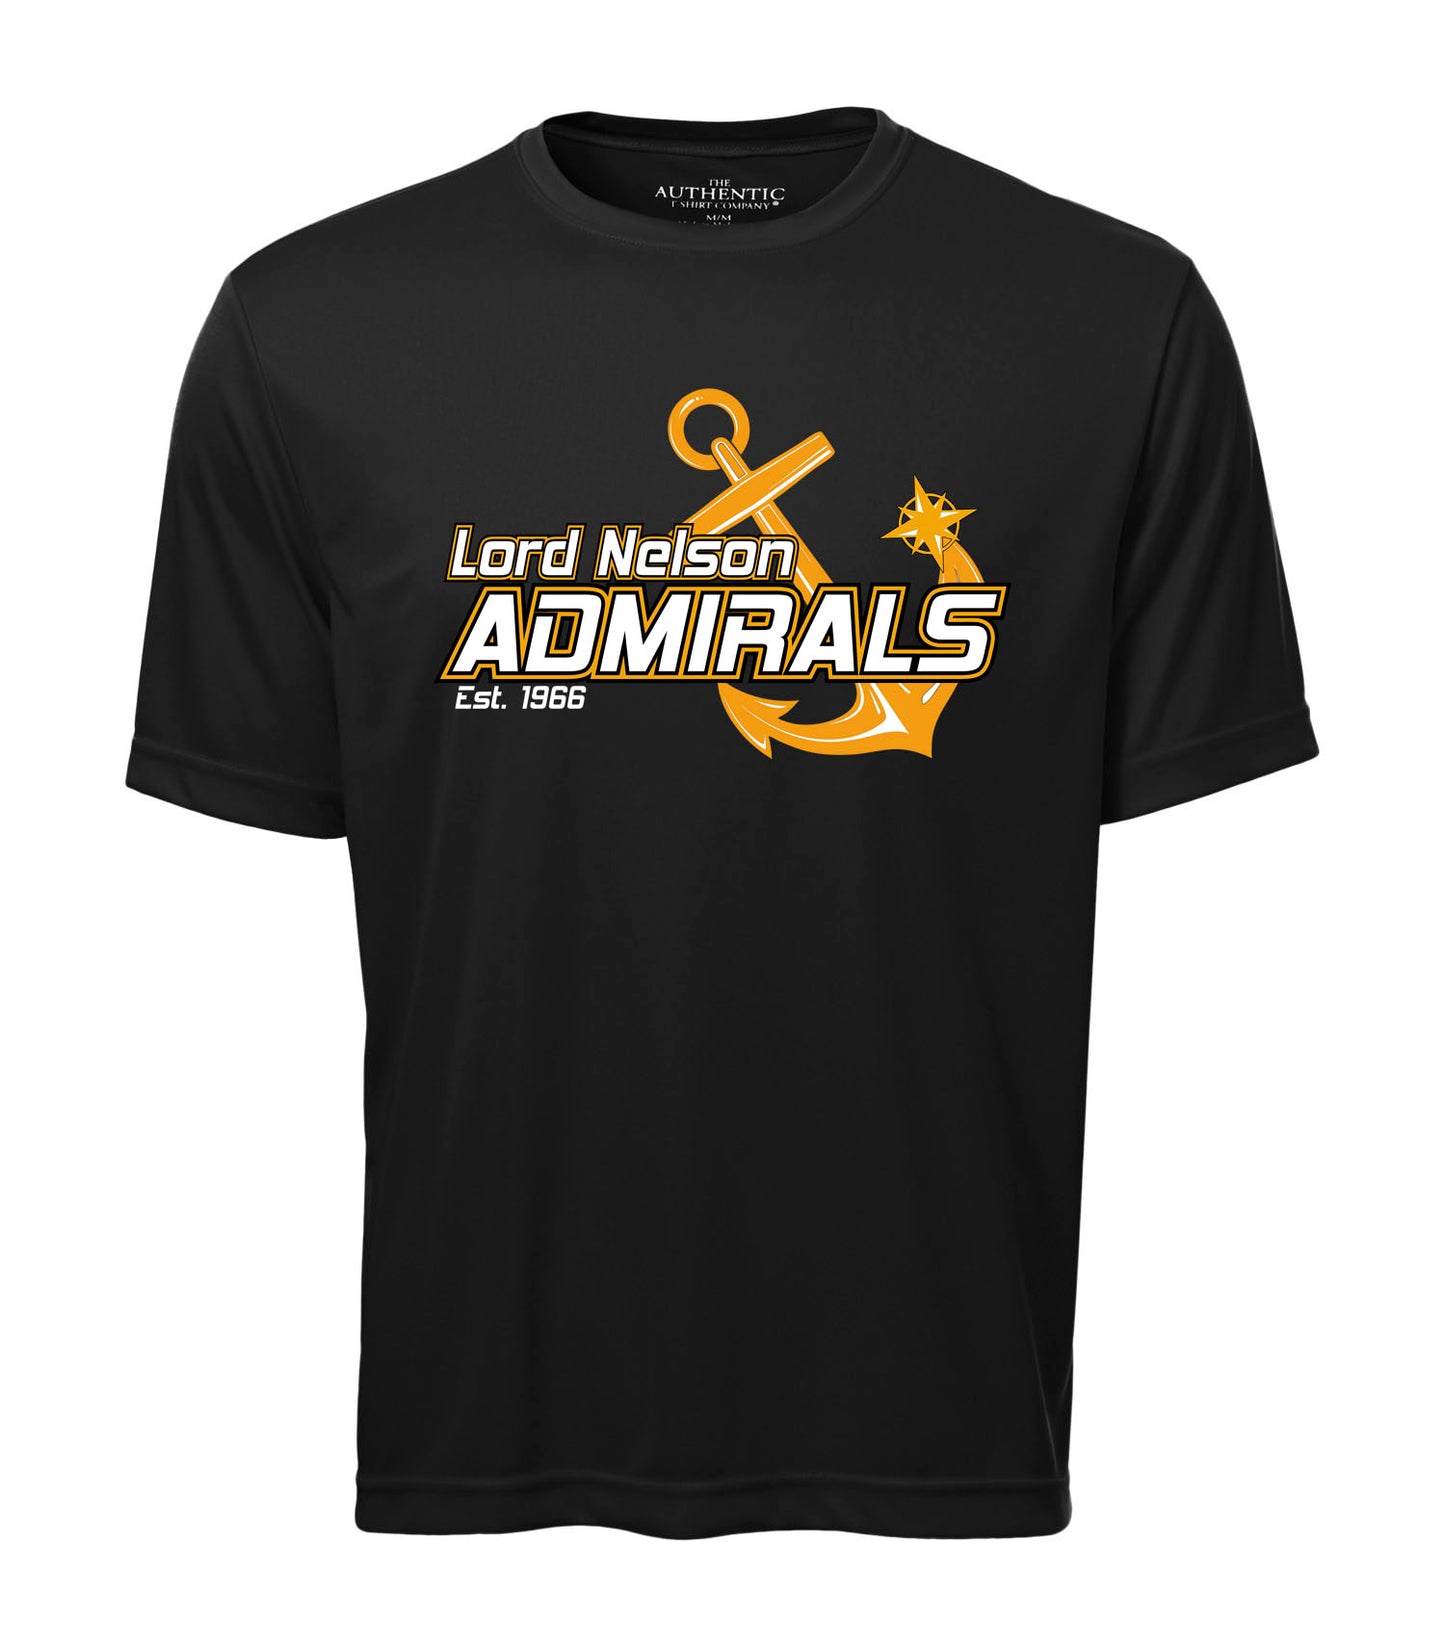 Lord Nelson Admirals Adult Dry Fit Spirit Wear Shirt